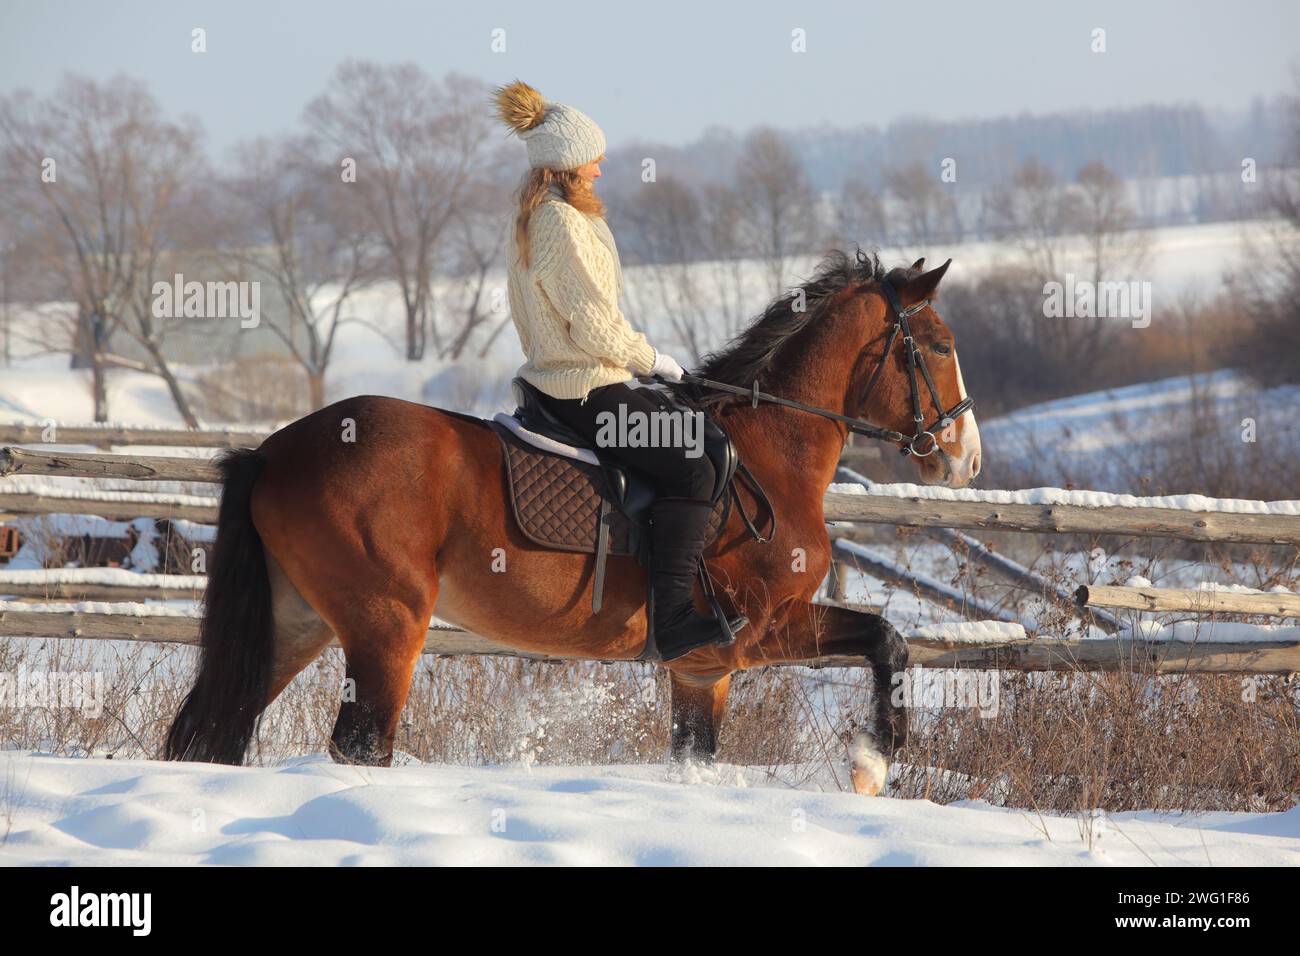 Girl galloping on horse in snowing winter ranch Stock Photo